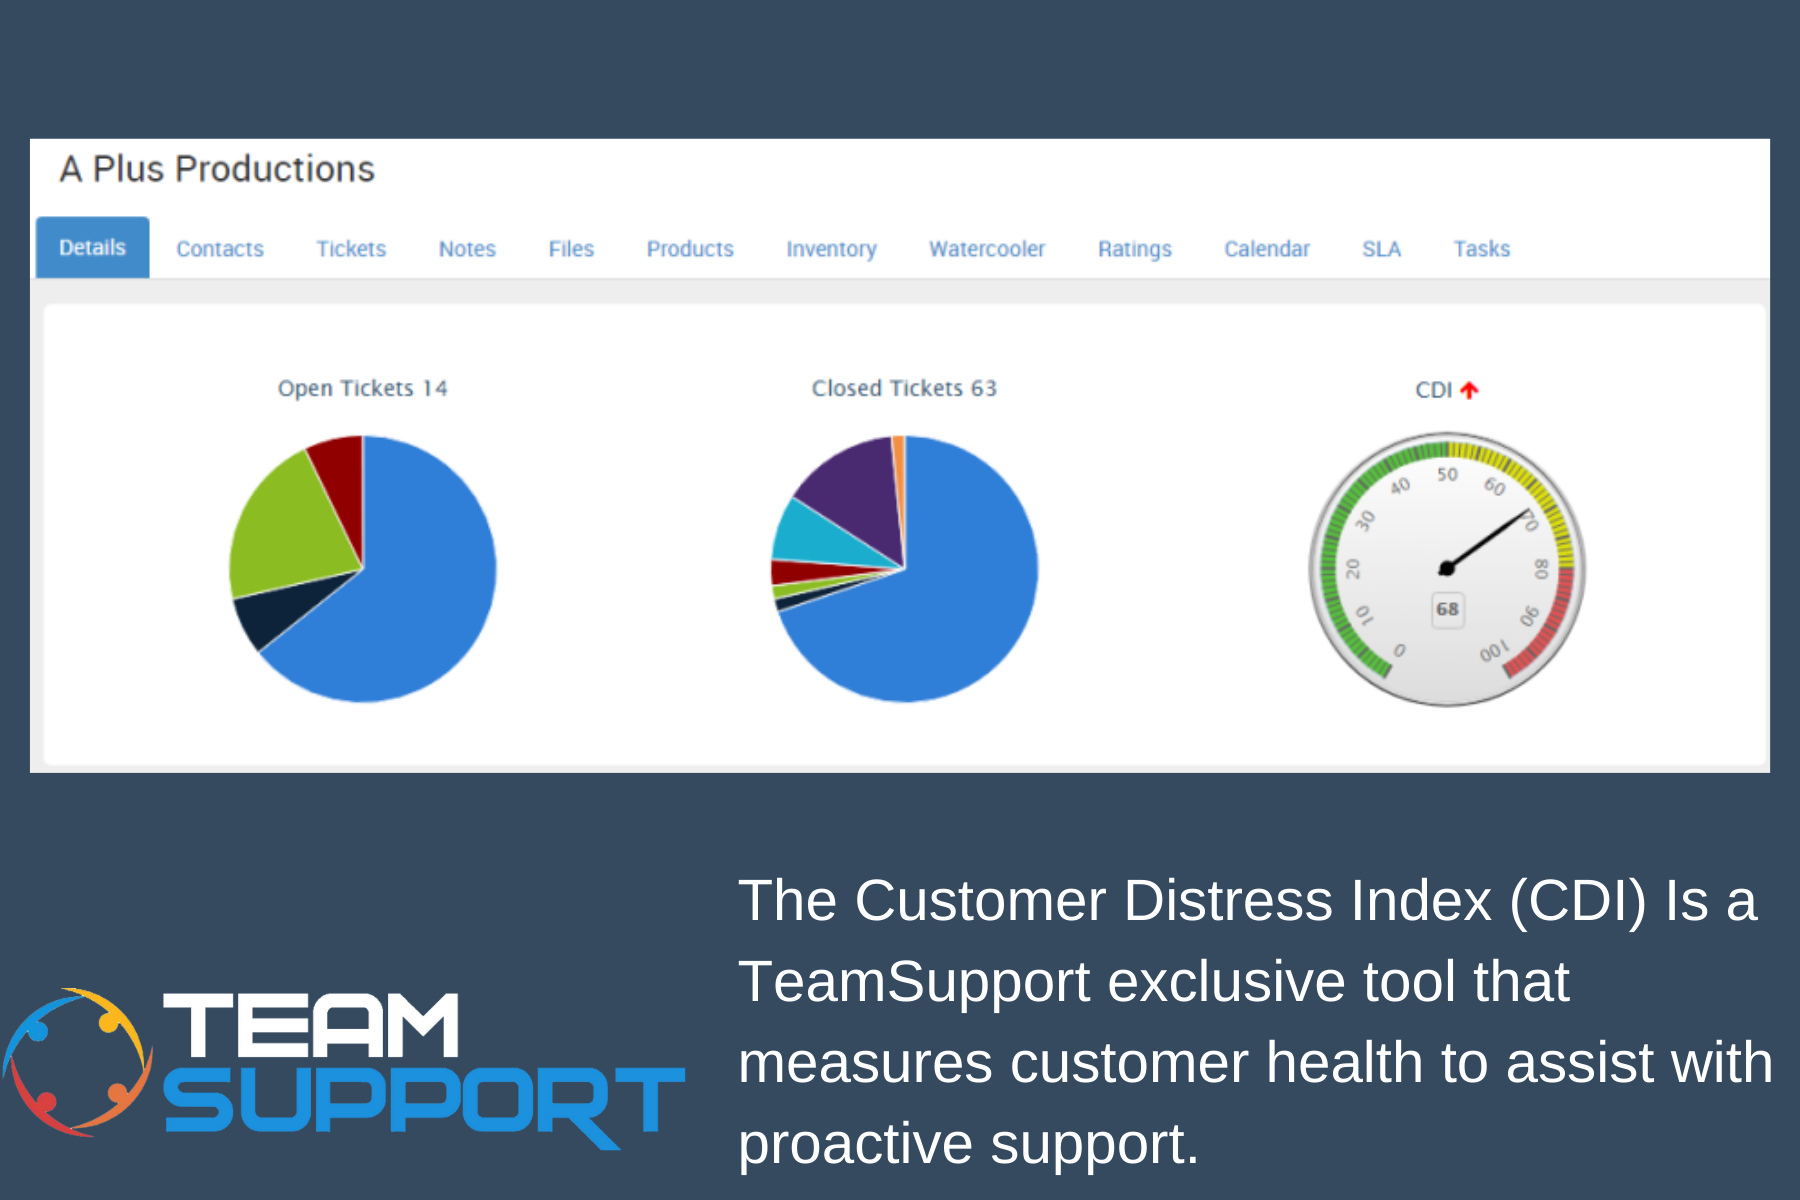 TeamSupport Software - The proprietary Customer Distress Tool